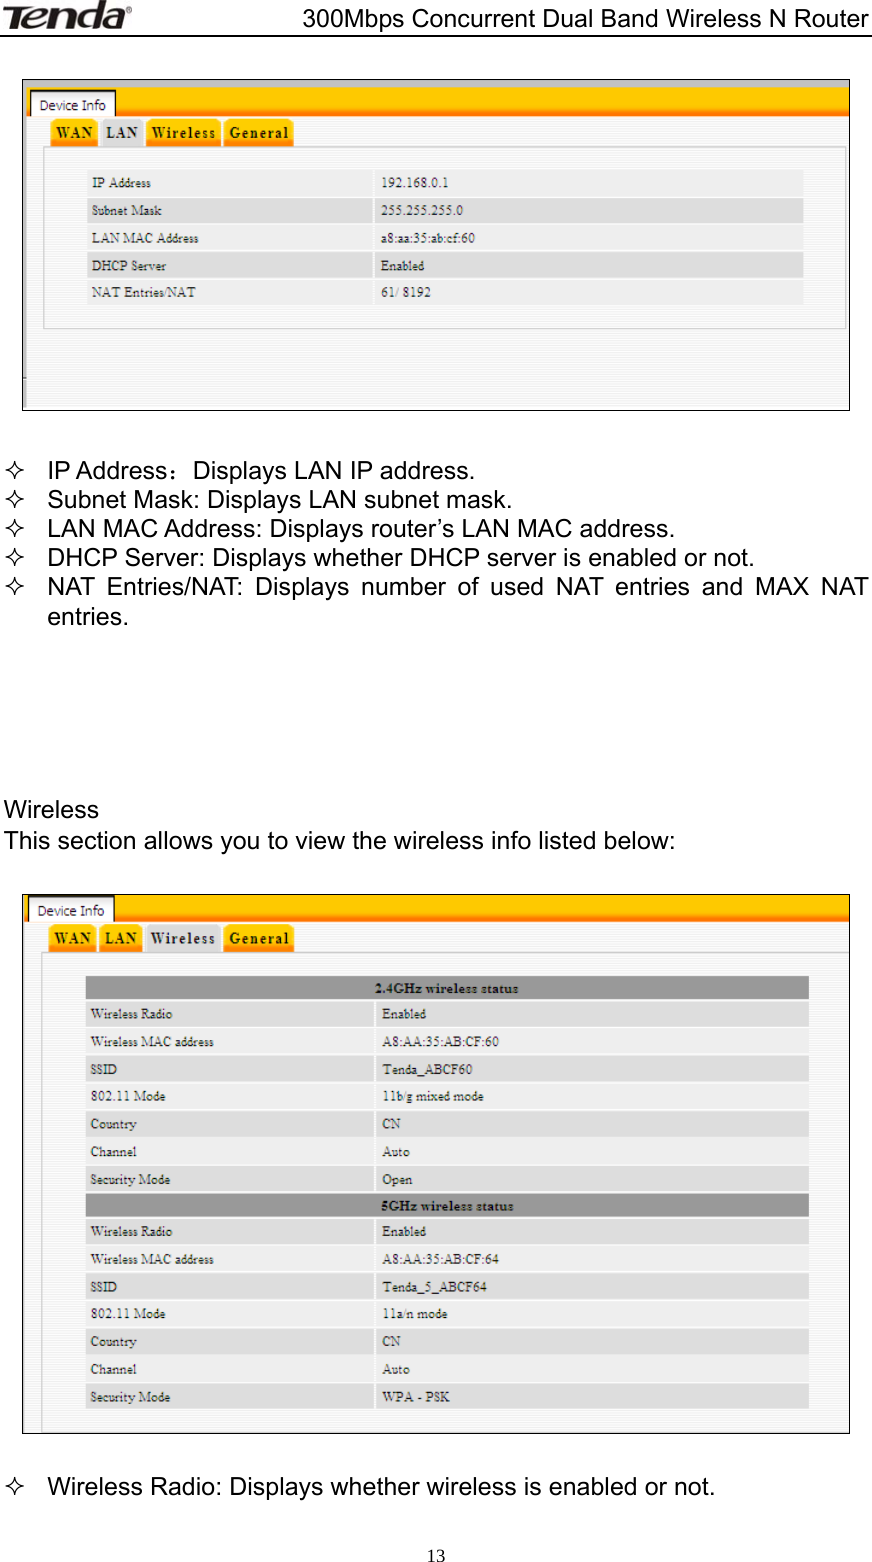                       300Mbps Concurrent Dual Band Wireless N Router  13   IP Address：Displays LAN IP address.   Subnet Mask: Displays LAN subnet mask.   LAN MAC Address: Displays router’s LAN MAC address.   DHCP Server: Displays whether DHCP server is enabled or not.   NAT Entries/NAT: Displays number of used NAT entries and MAX NAT entries.      Wireless This section allows you to view the wireless info listed below:      Wireless Radio: Displays whether wireless is enabled or not. 